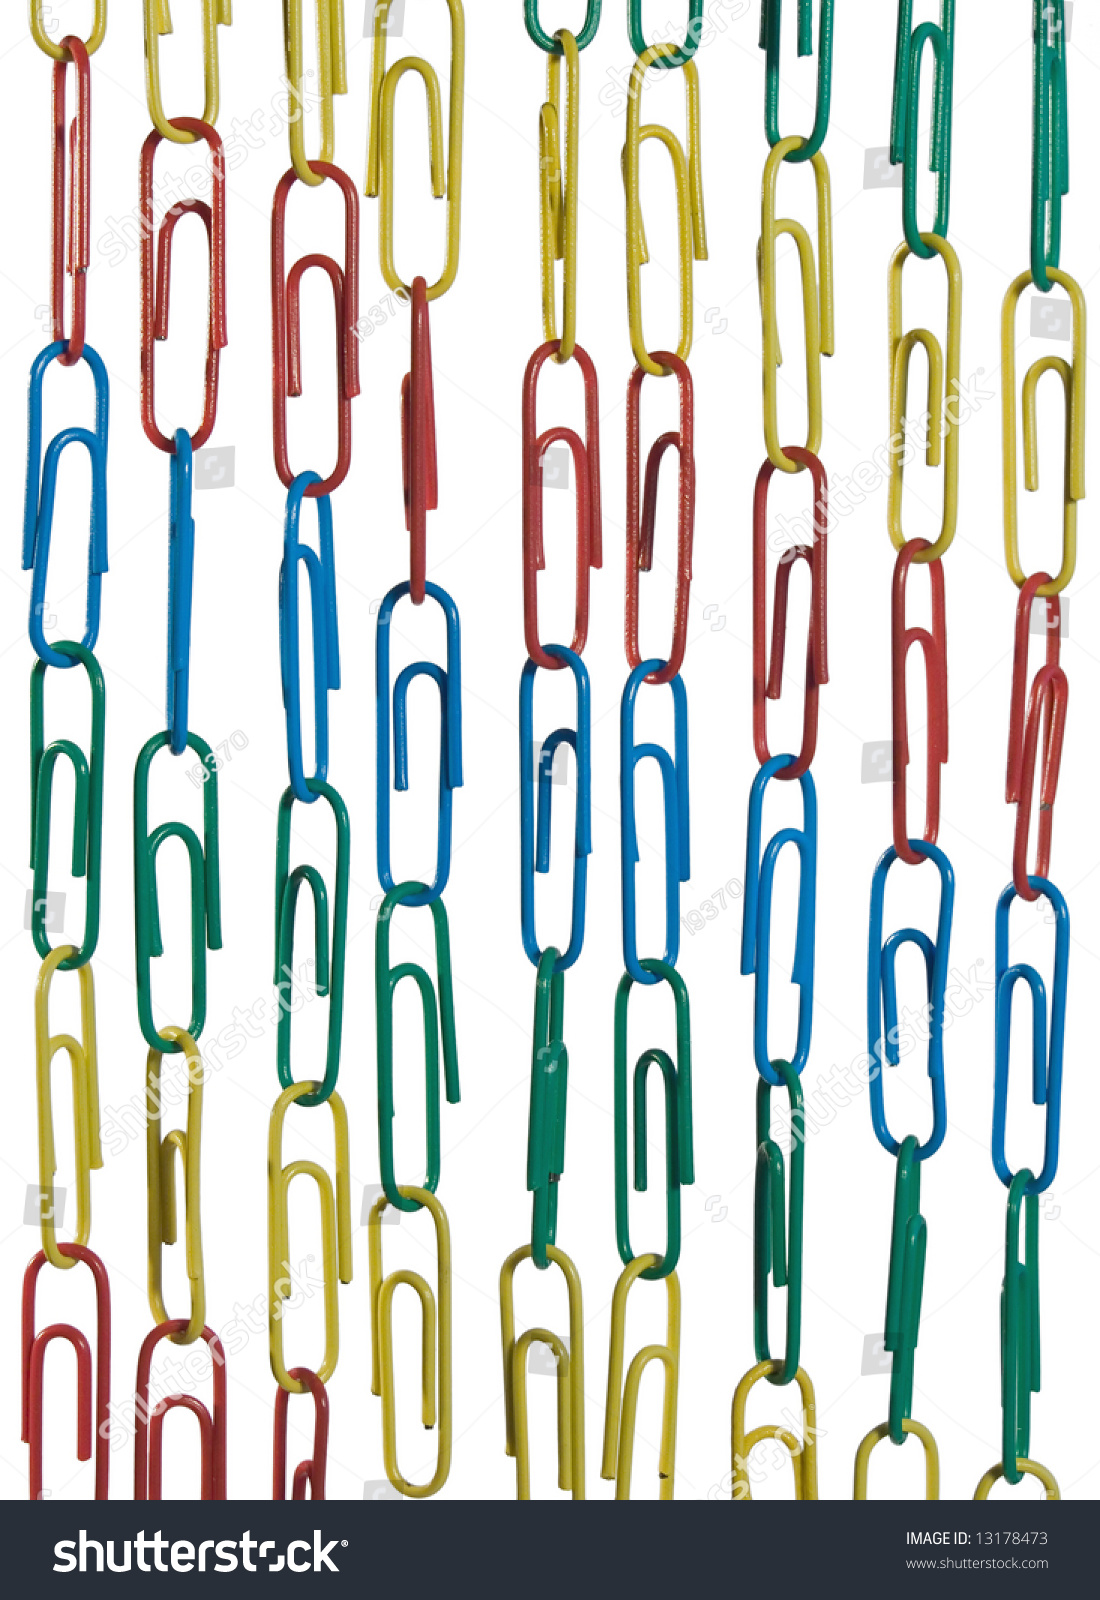 Color Chains Of Paper Clip Isolated On White Stock Photo 13178473